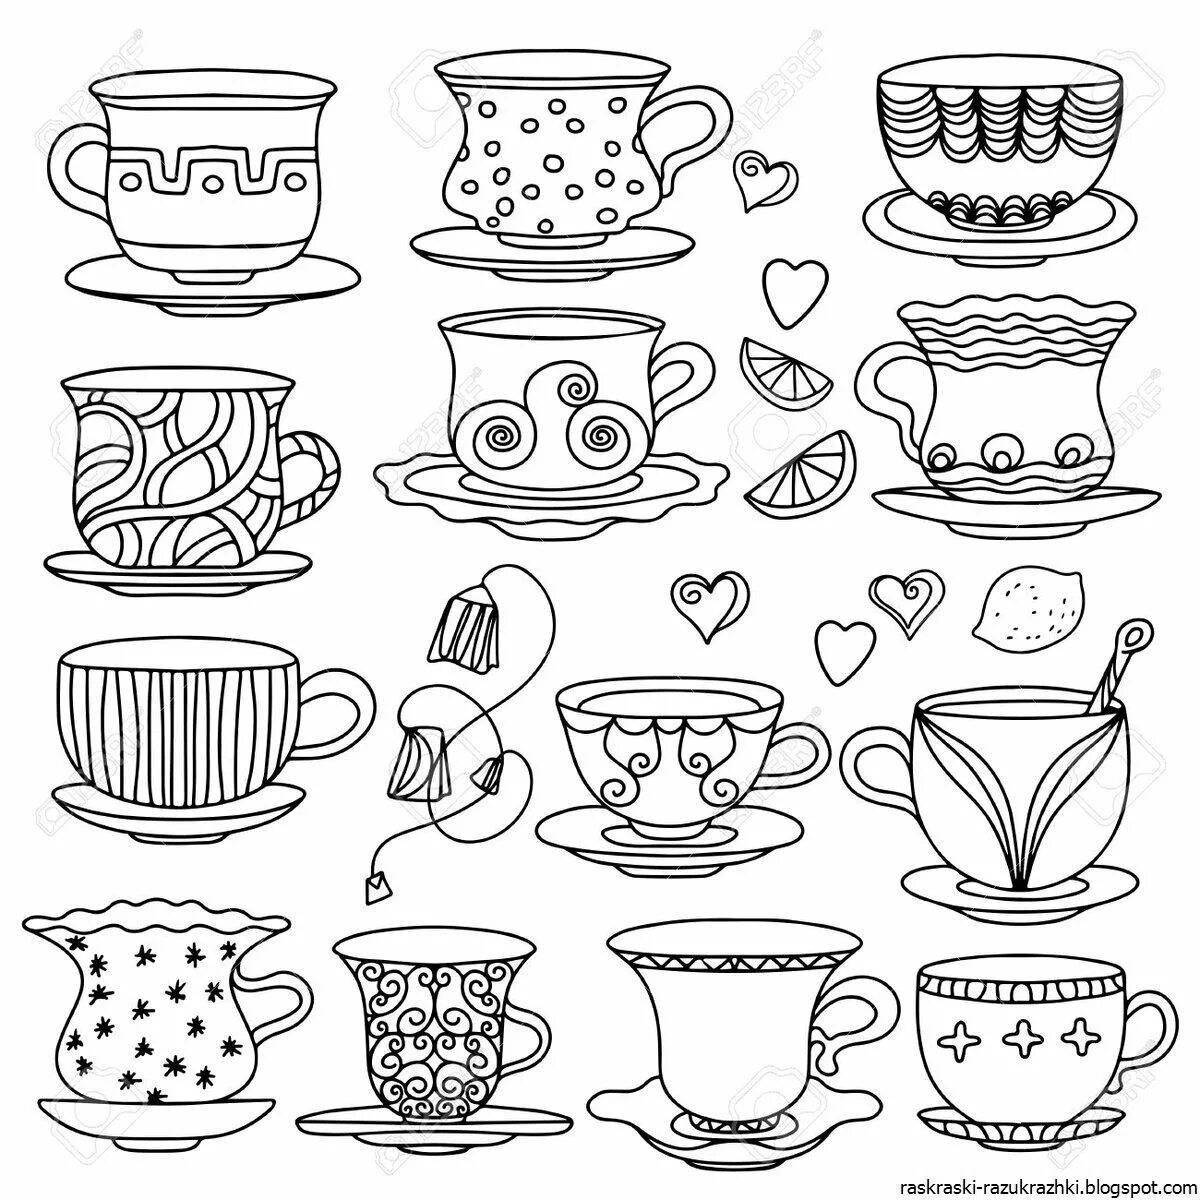 Wonderful tea cup coloring book for babies